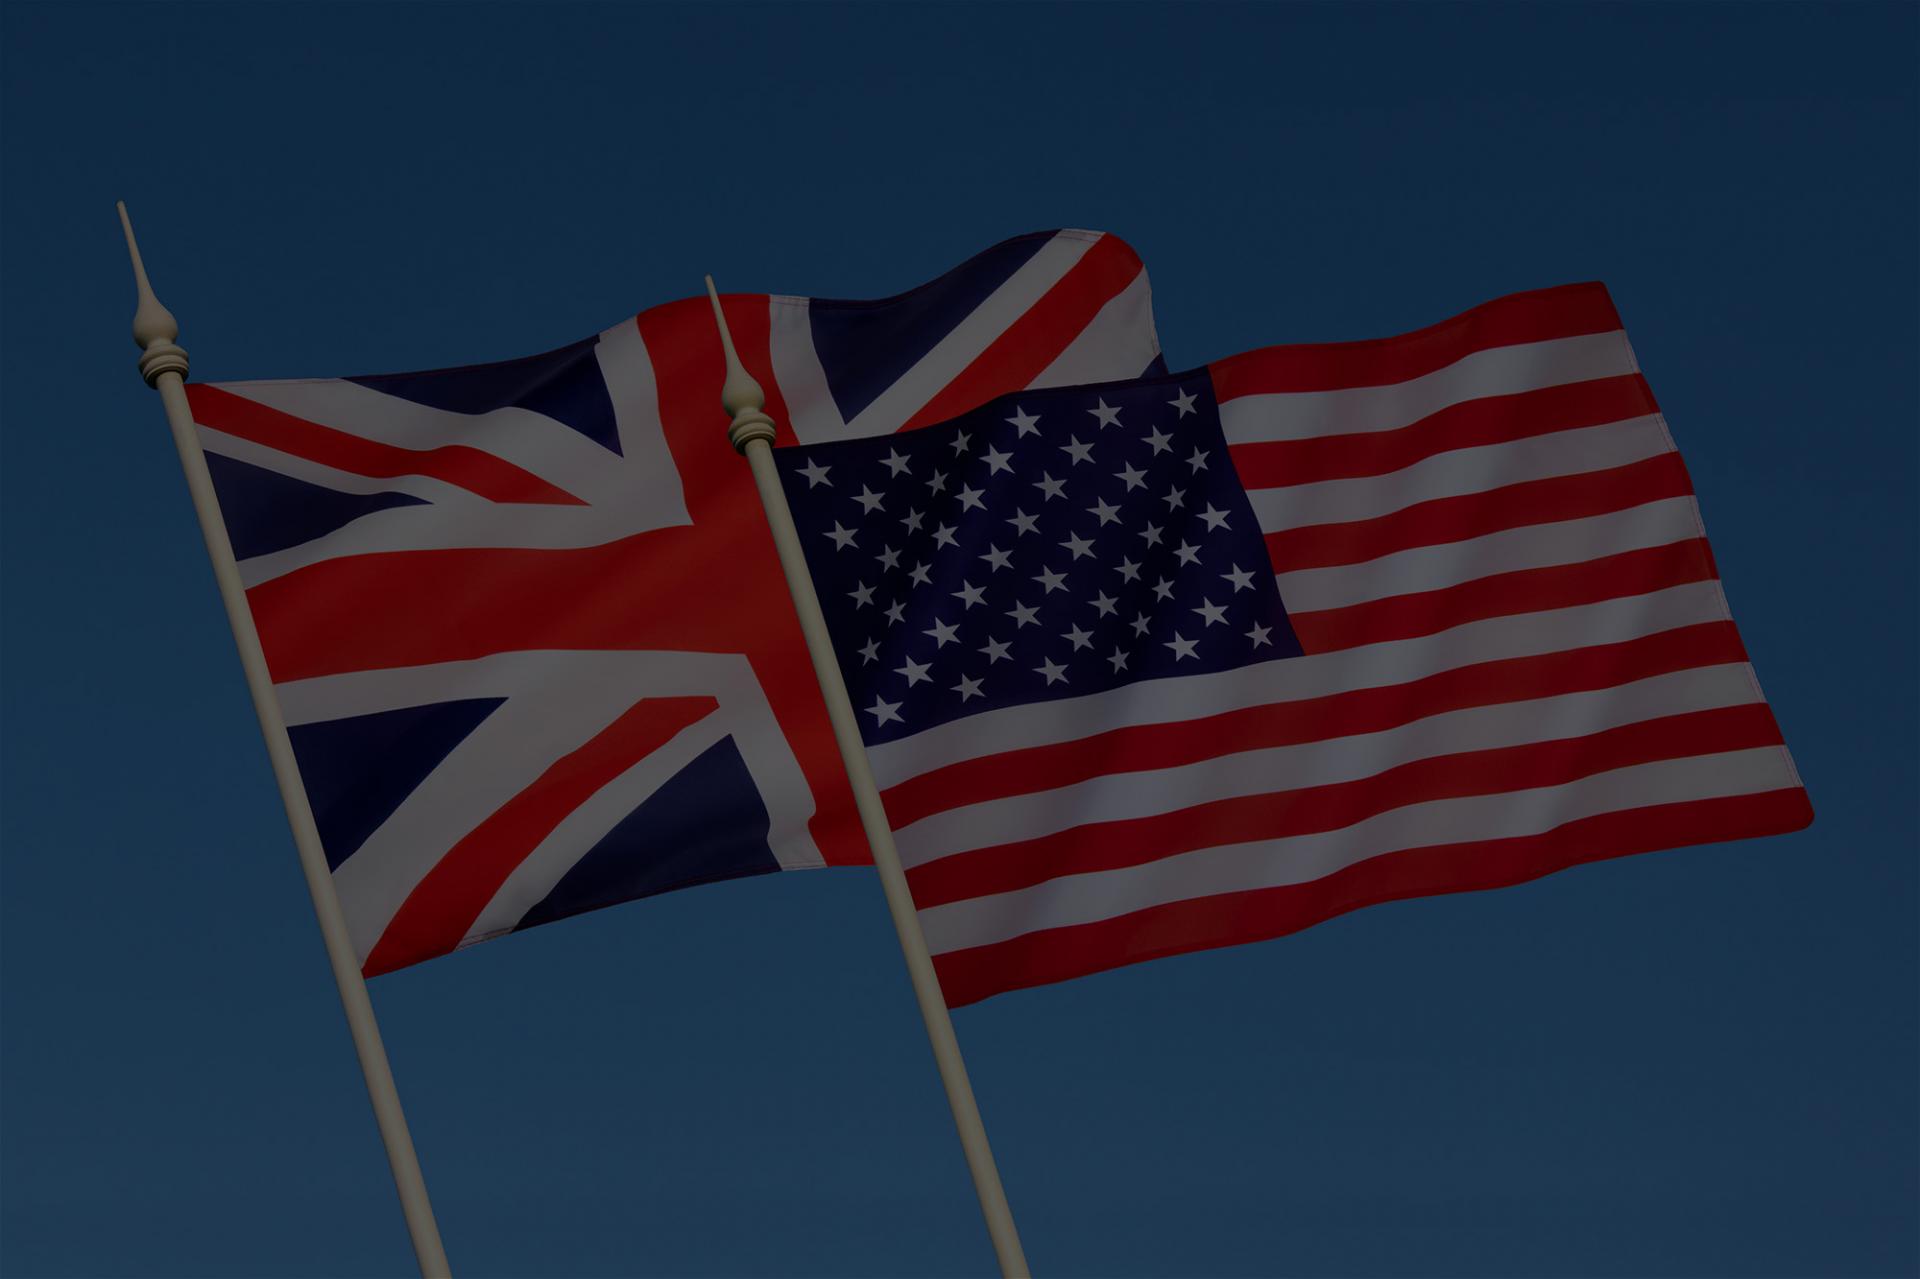 How private business mergers and acquisitions differ between the US and UK